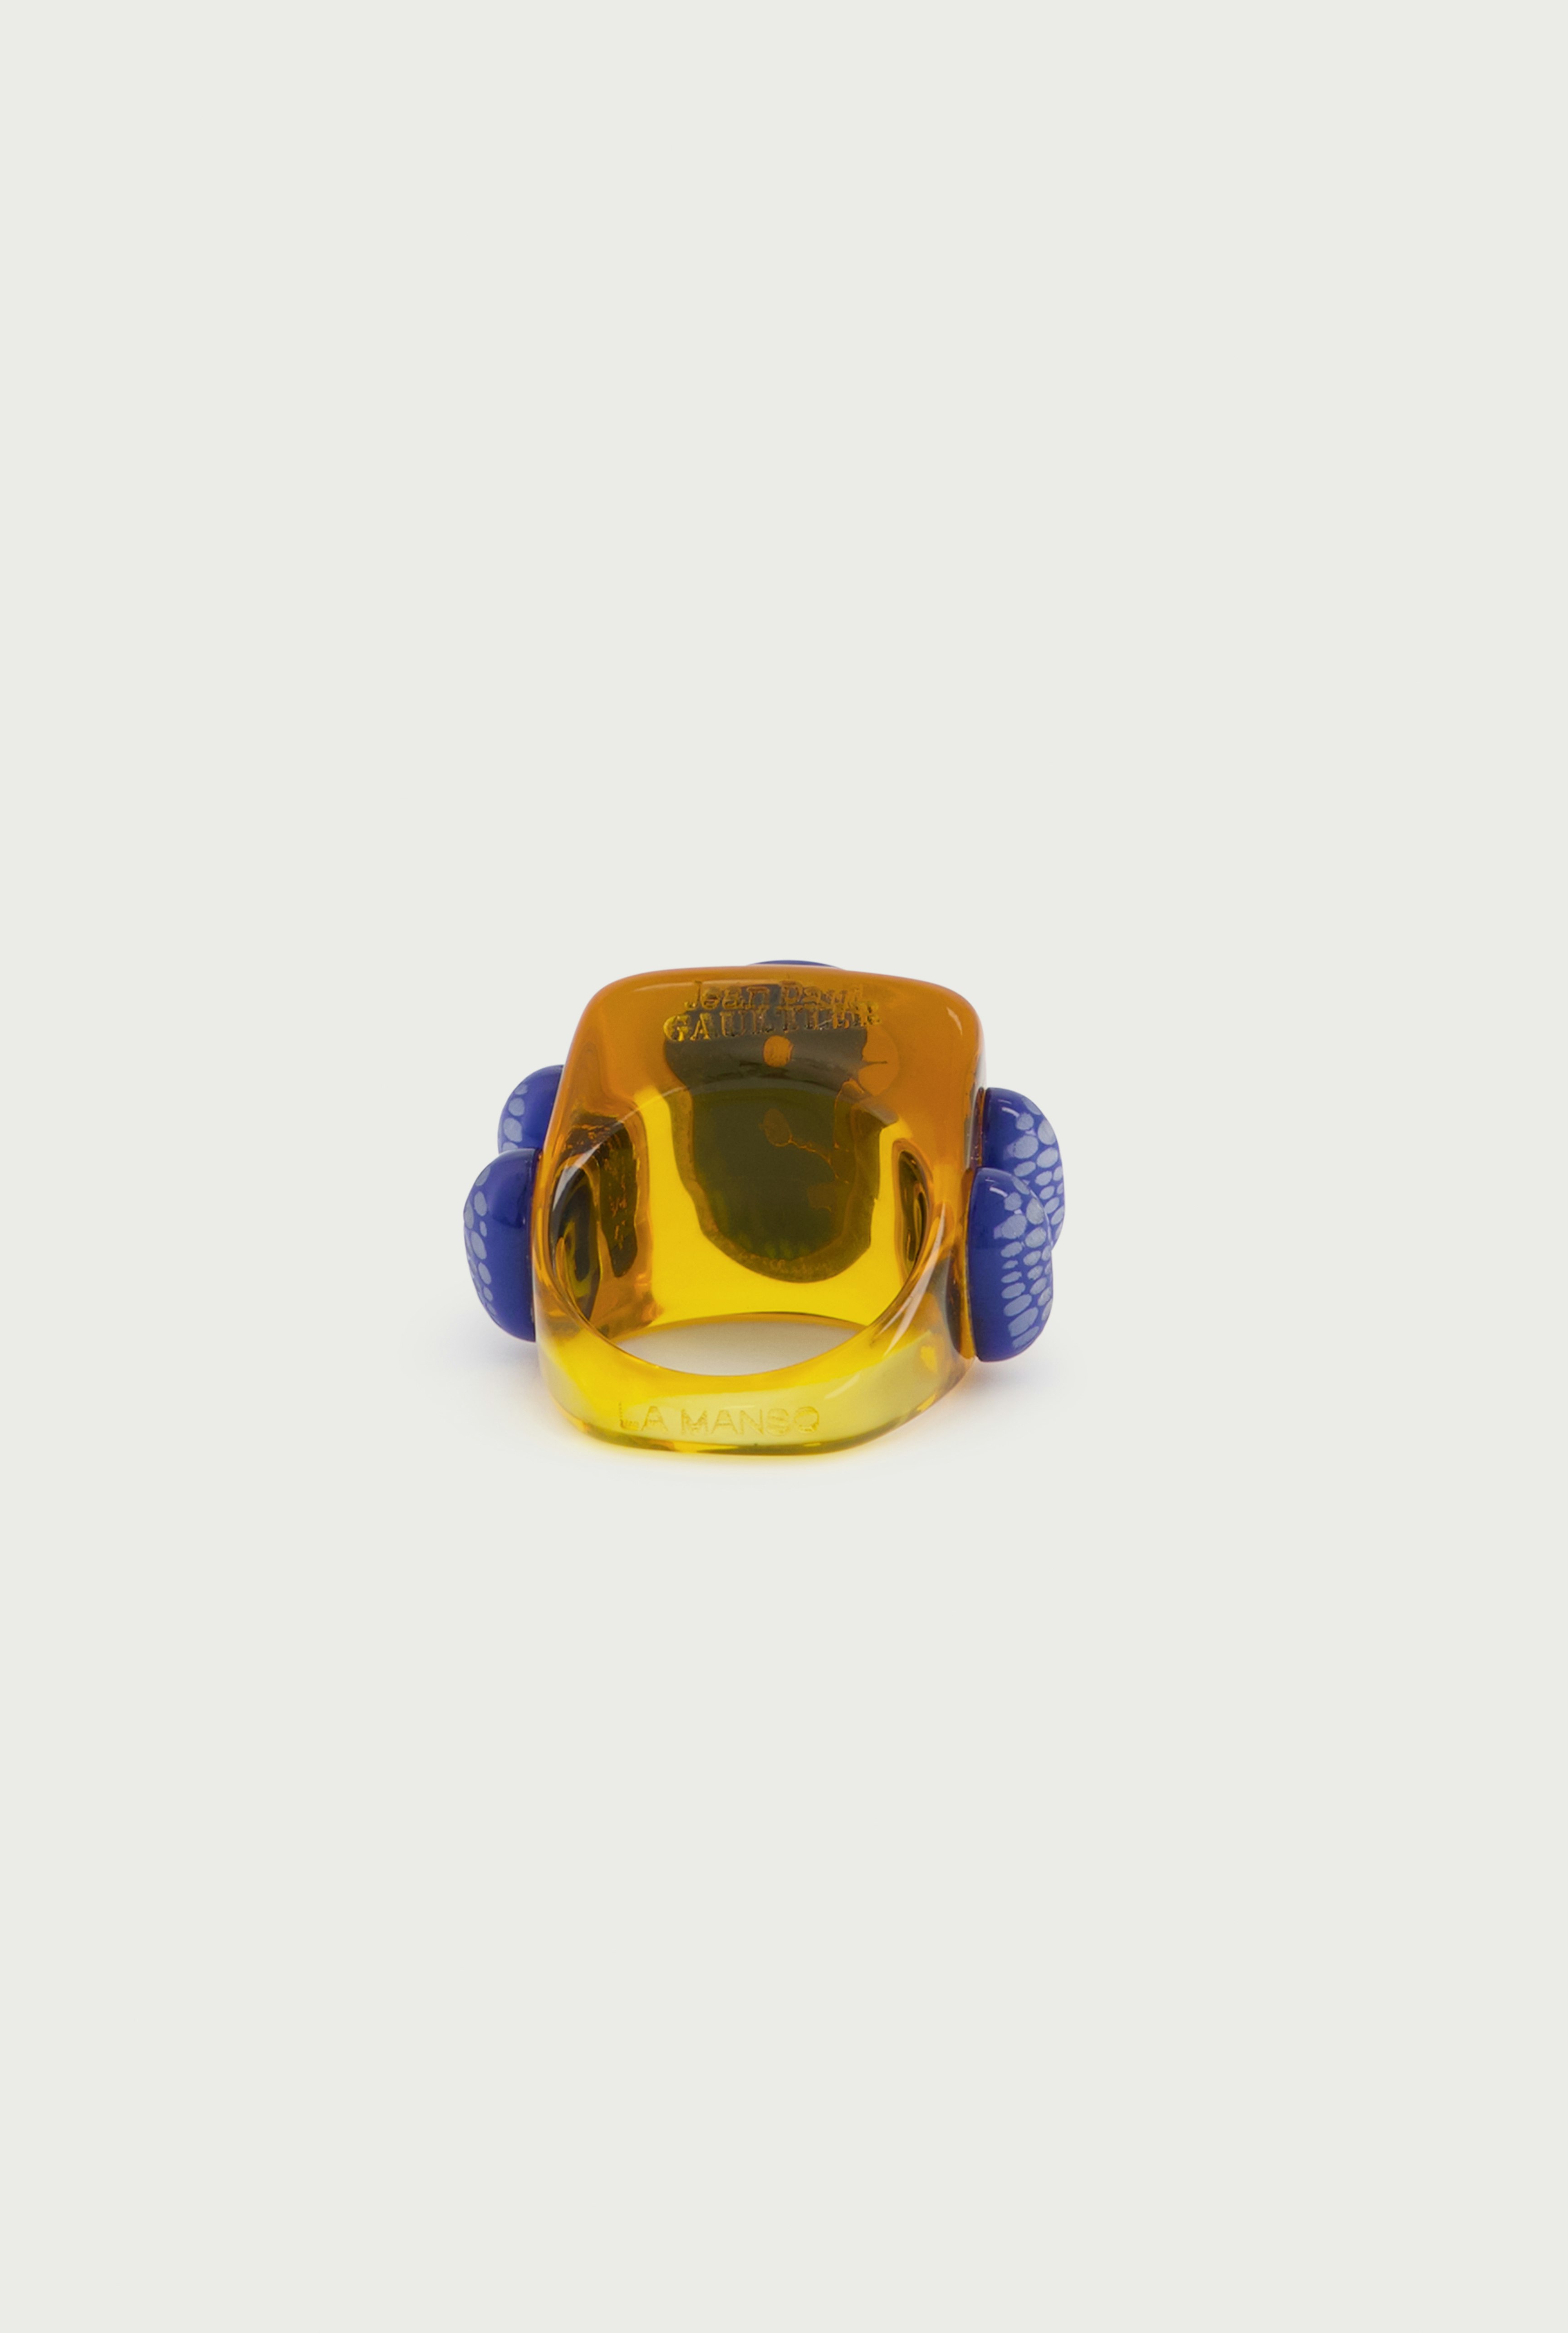 The Blue Submarine Ring Jean Paul Gaultier x La Manso